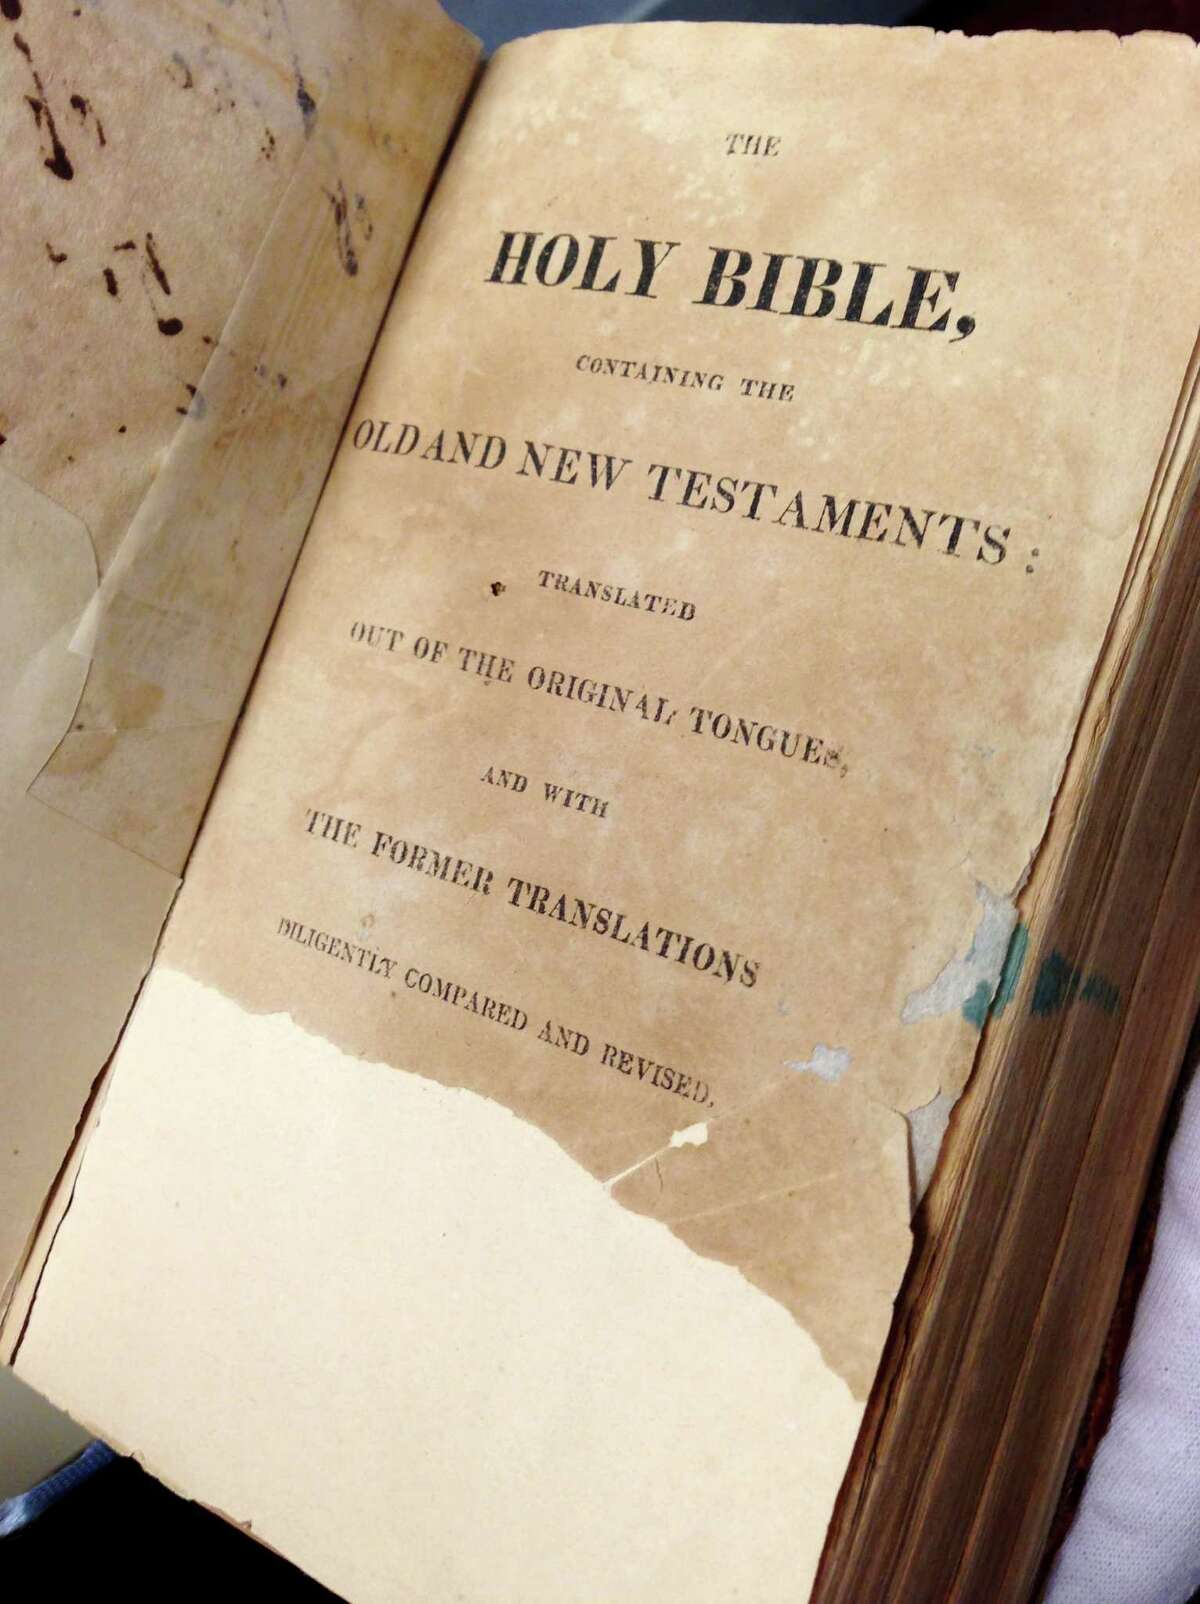 It was long thought Sam Houston’s signature was on the missing part of the torn page, but new evidence raises doubts about whose Bible this was. whether the Bible was his. it was his. This Monday, Jan. 12, 2015 photo shows the torn flyleaf inside of what has long been called the Sam Houston Bible, in Austin, Texas. Amateur historians have long thought that Sam Houston's signature was on the missing half of the page, but new evidence is raising doubts about whether the Bible used to swear-in Texas governors for nearly two centuries ever actually belonged to Houston. (AP Photo/Paul Weber)